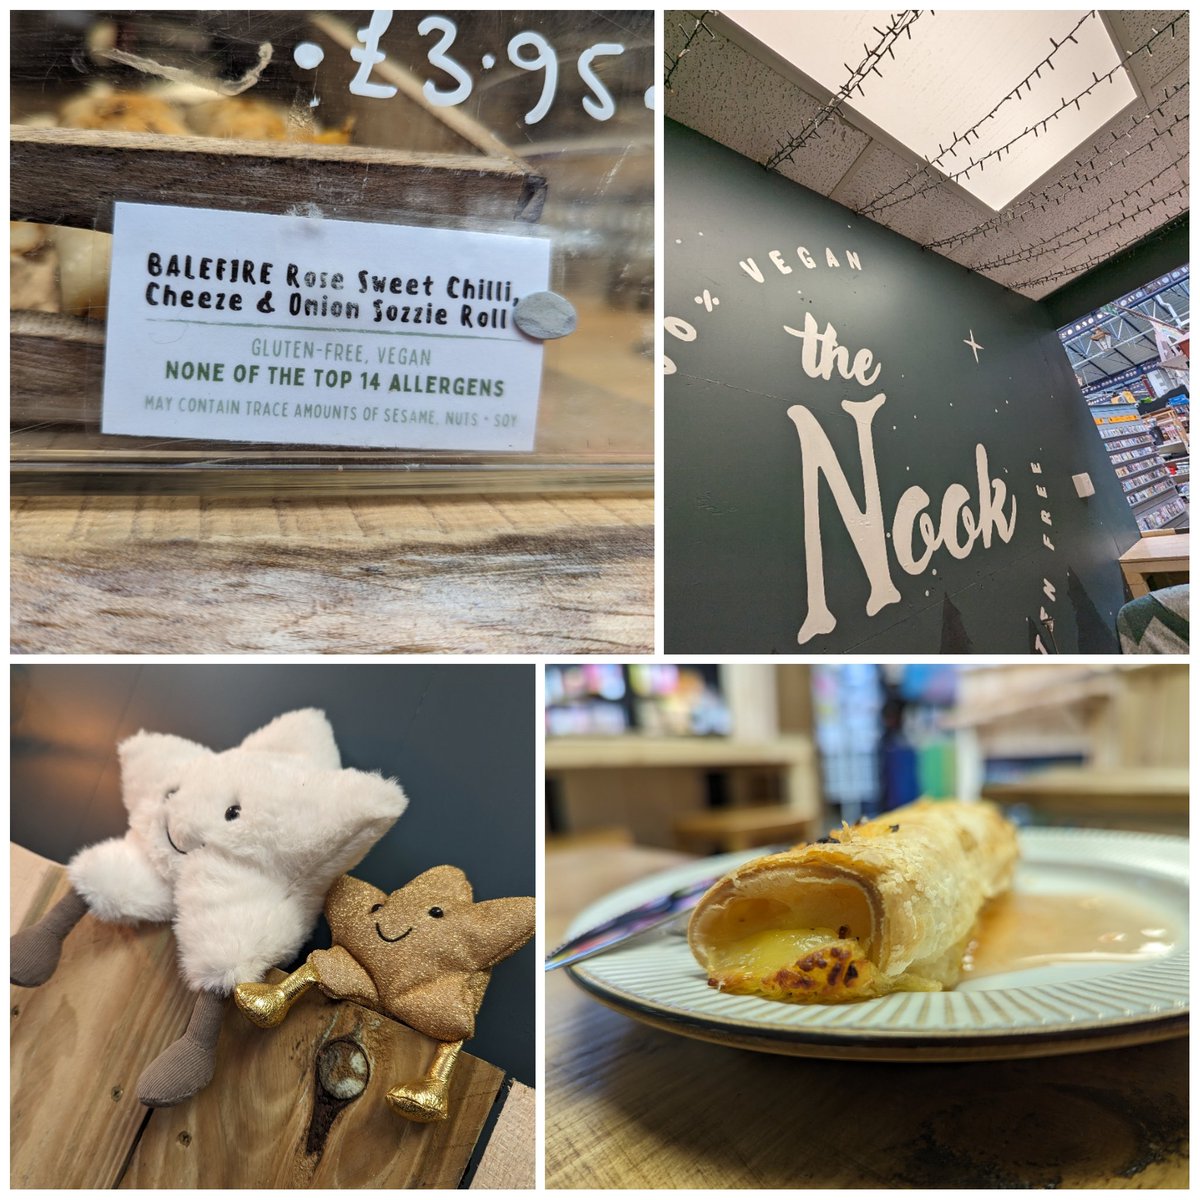 We've just sampled one of the homemade sweet chilli #vegan sausage rolls at The Nook inside @DurhamMarkets. Soooo good - and a lovely cosy spot to sit and watch the world go by too! #Durham #LoveDurham